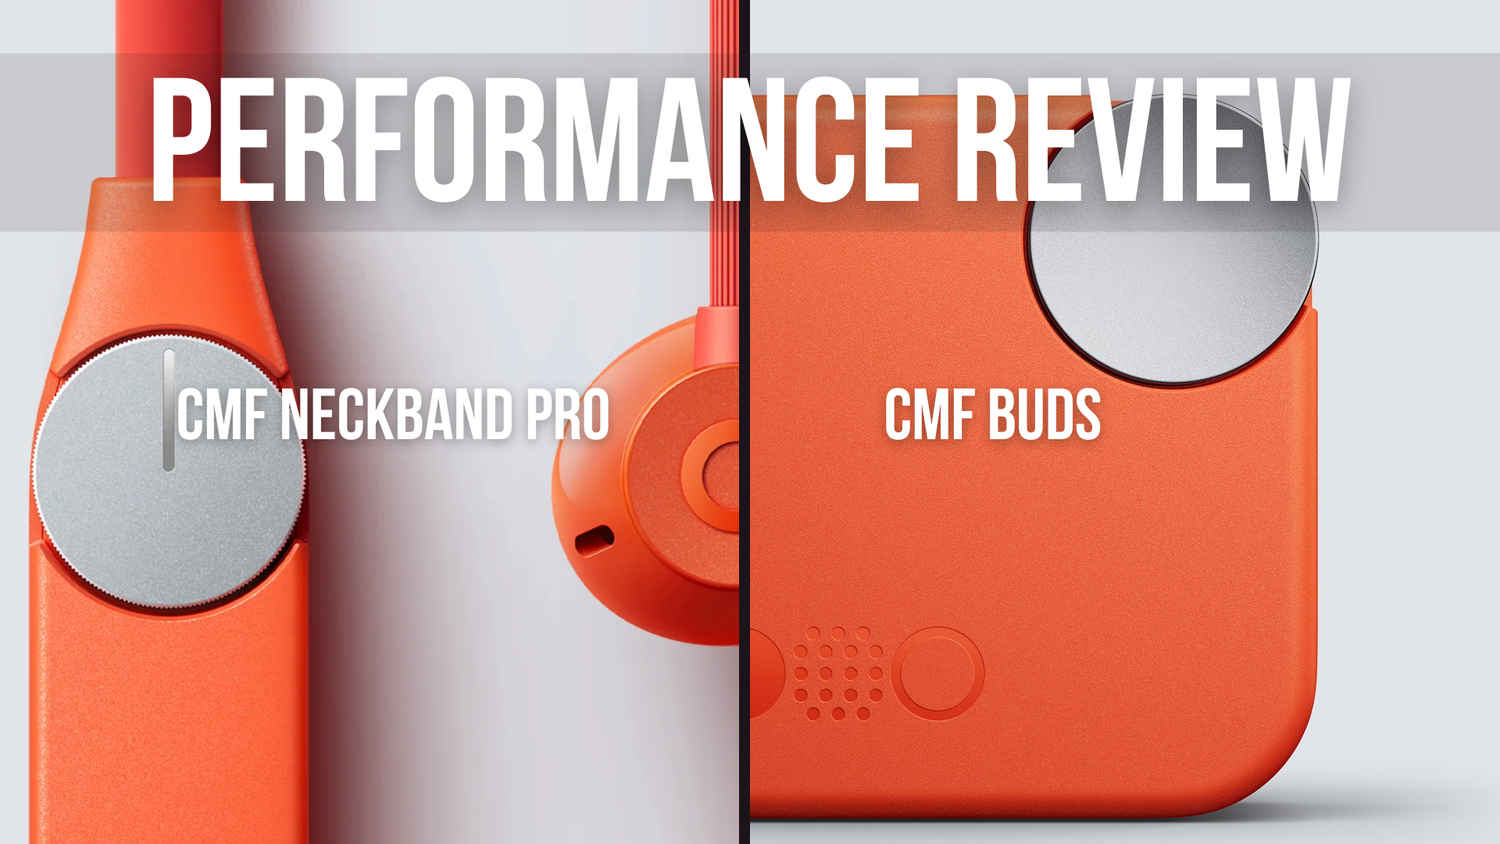 cmf Buds and cmf Neckband Pro launched – Here’s a look at their sound signature, ANC, and microphone performance